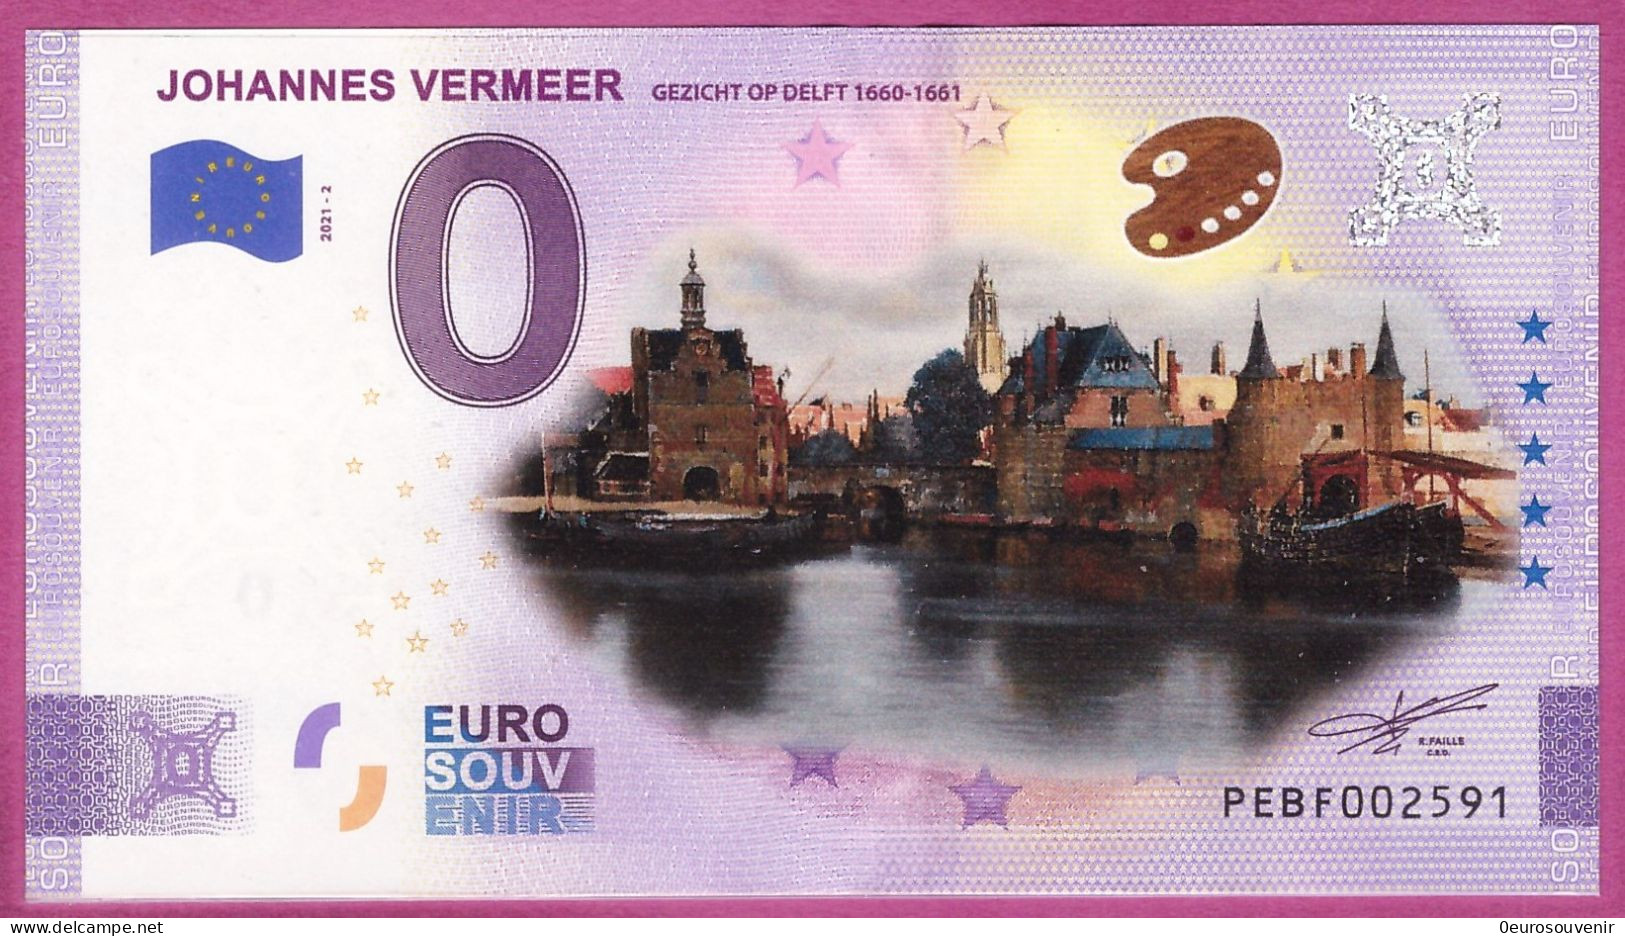 0-Euro PEBF 2021-2 COLOR JOHANNES VERMEER - GEZICHT OP DELFT - FARBDRUCK - Private Proofs / Unofficial